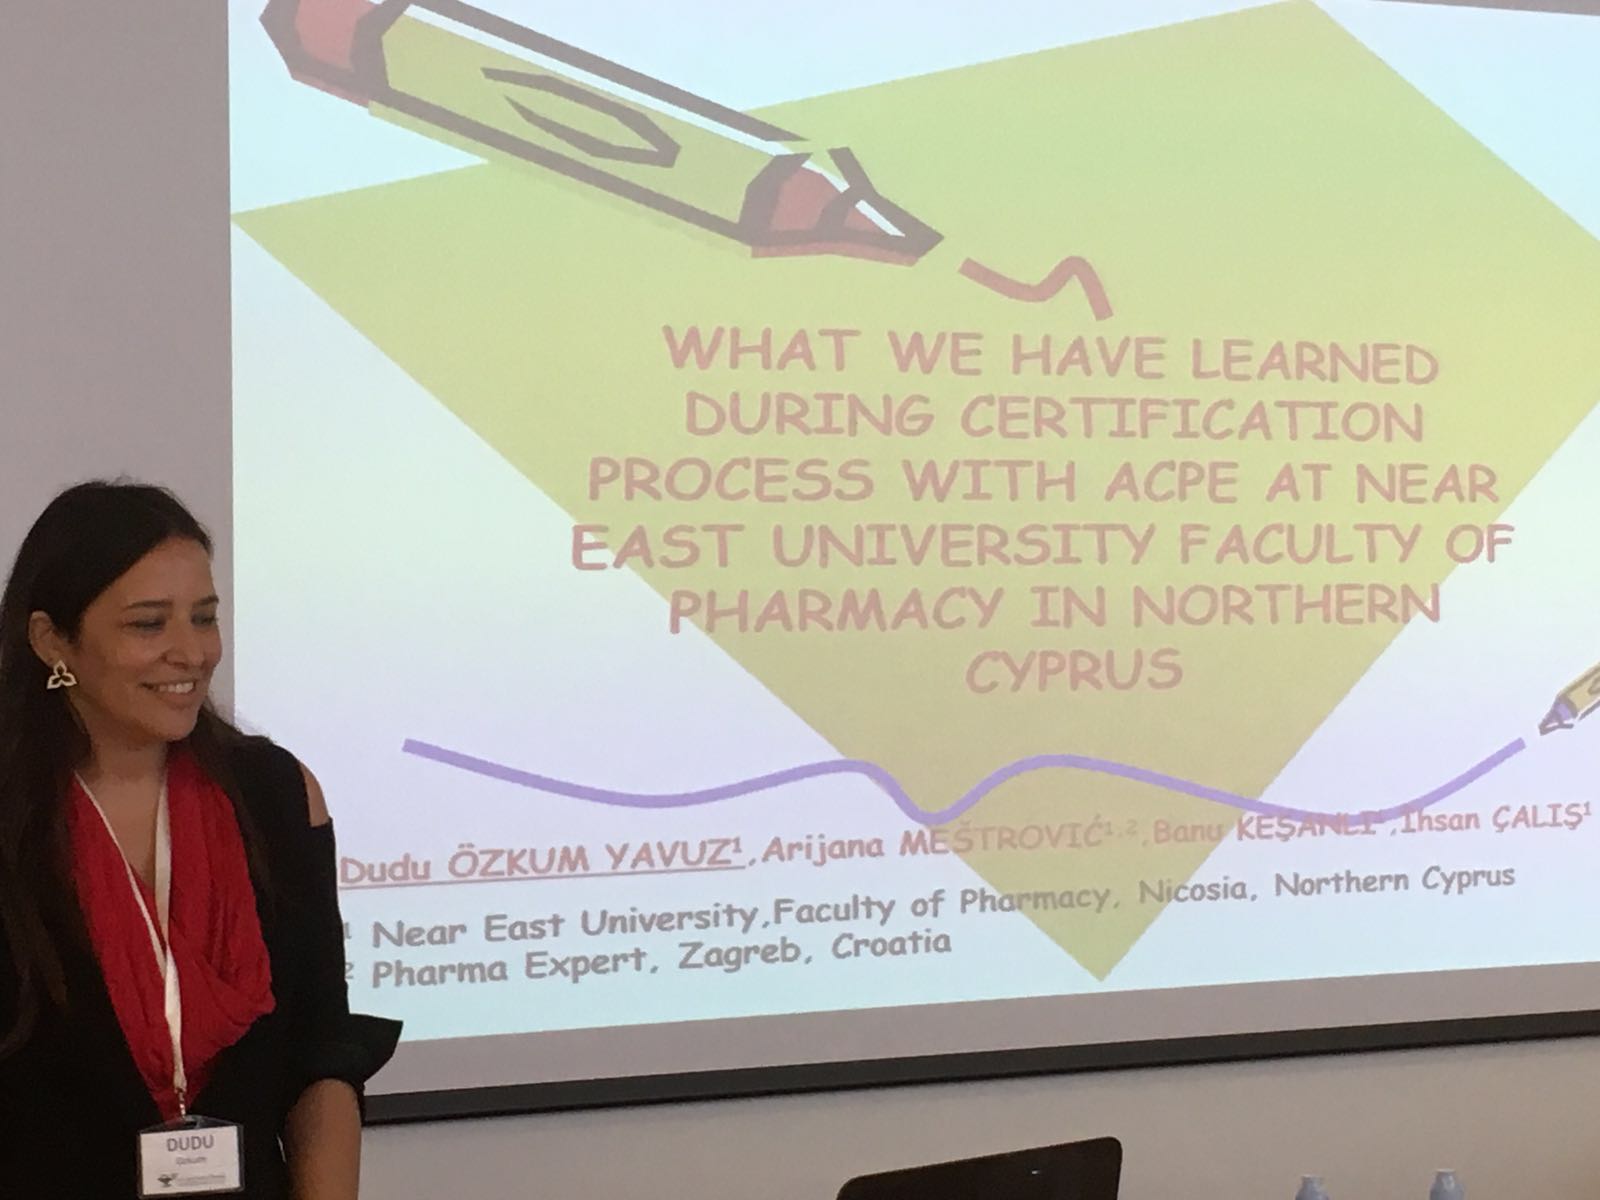 International ACPE Accreditation Process of the Near East University Faculty of Pharmacy was explained in Croatia